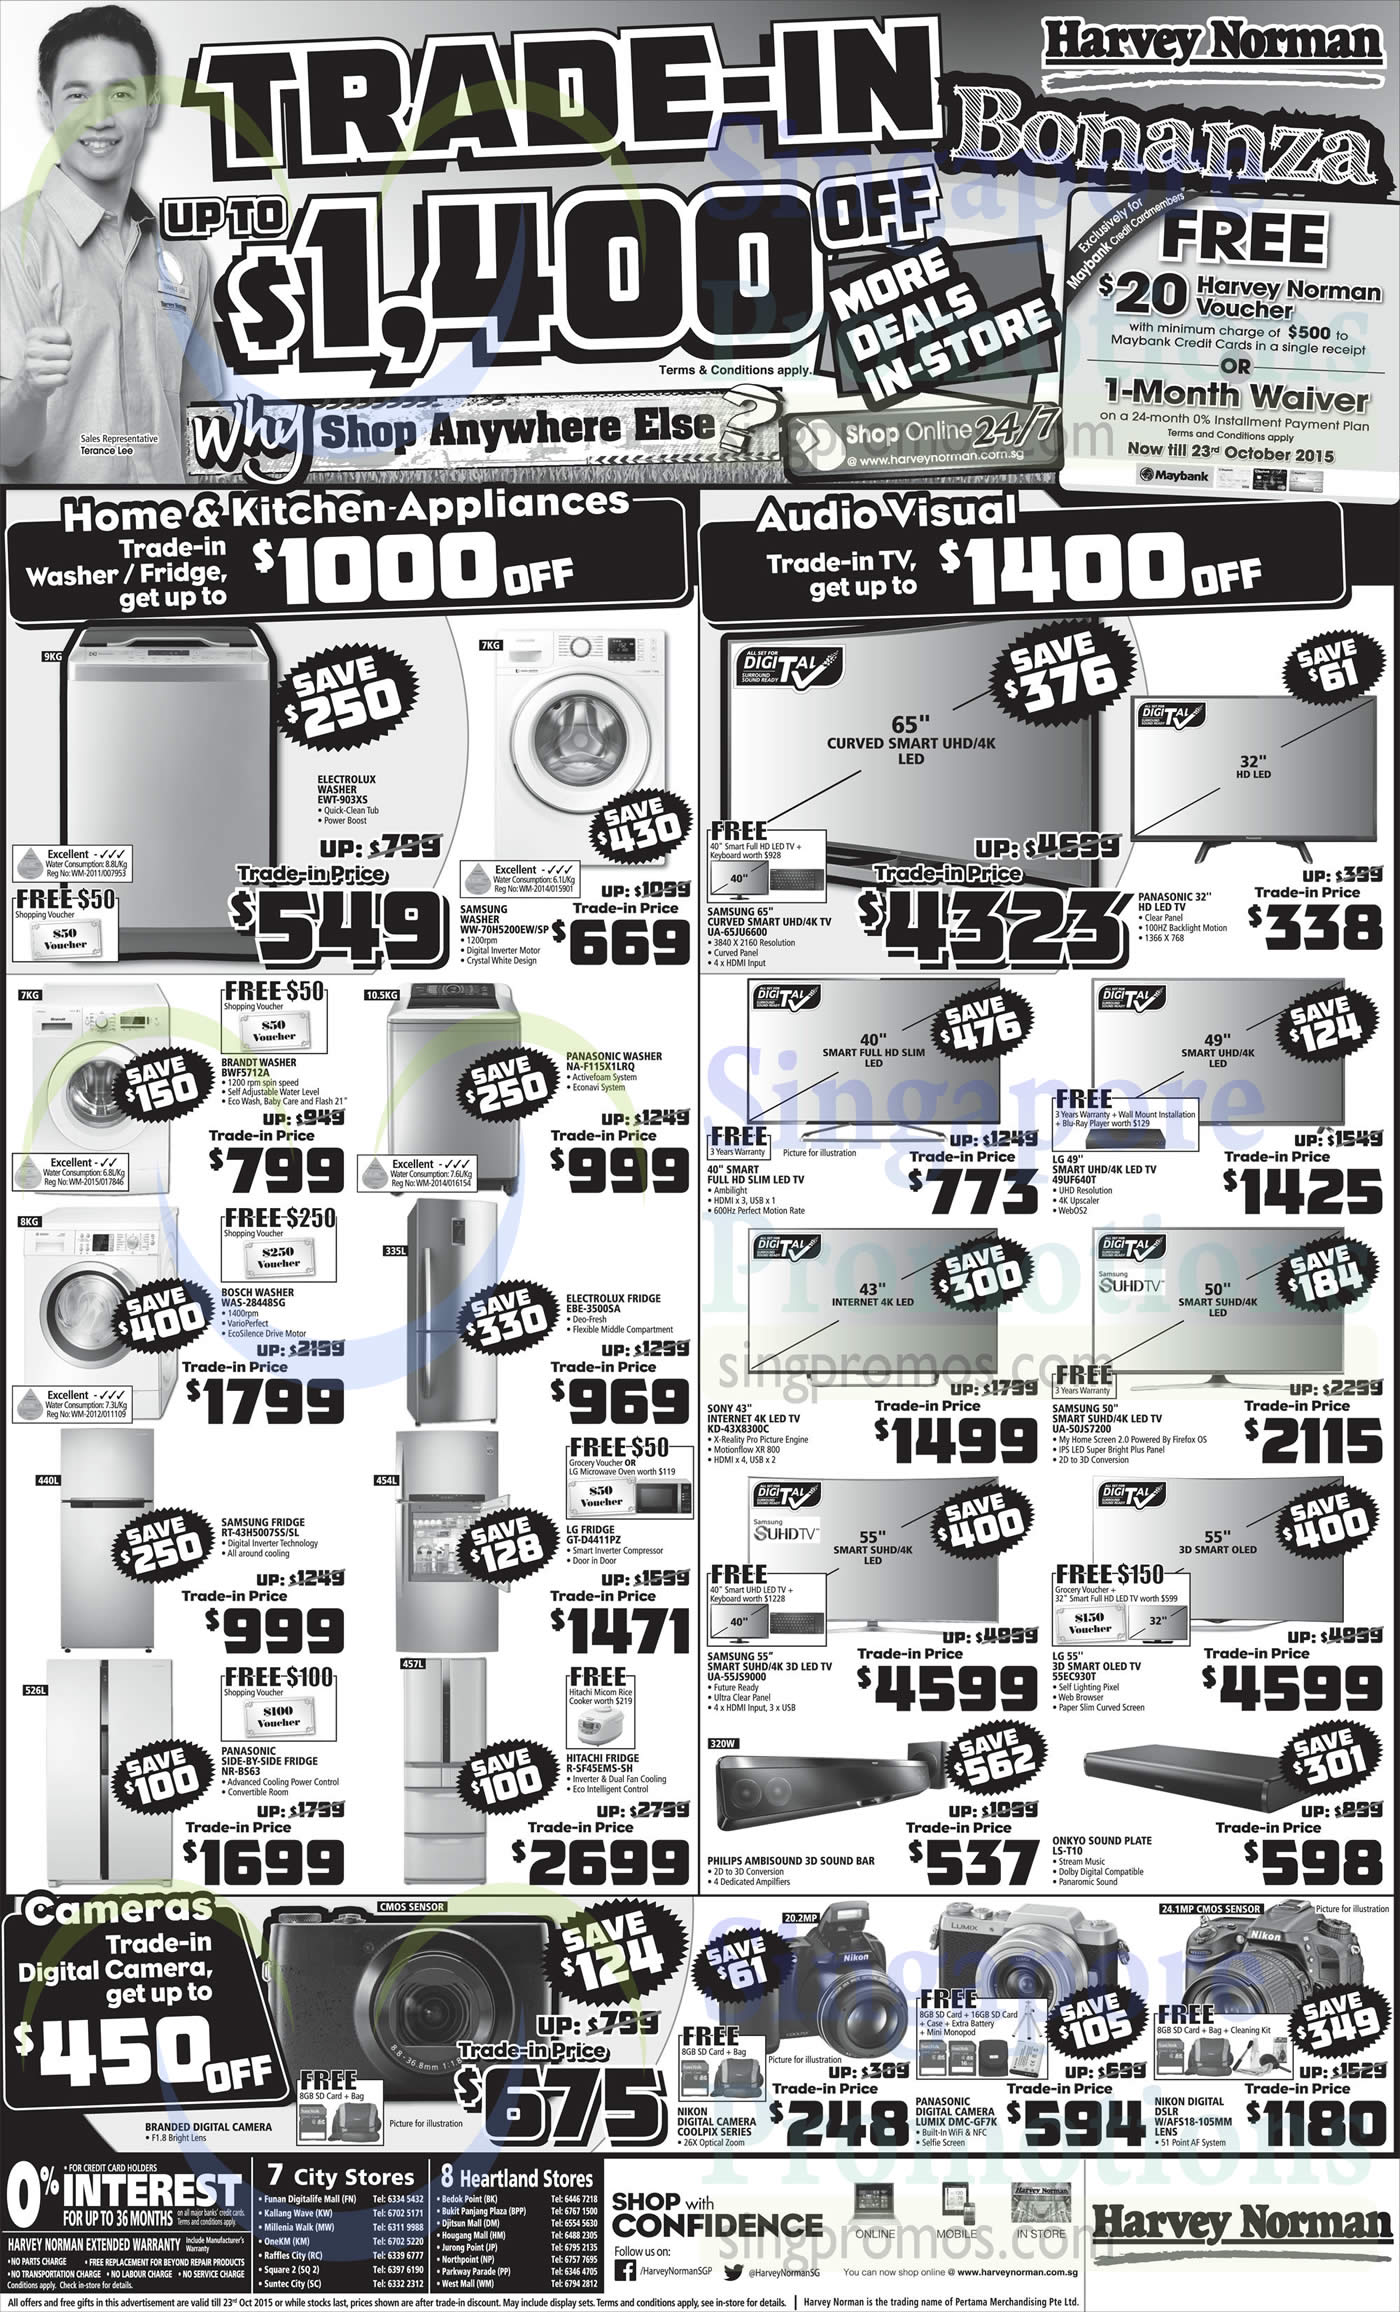 Featured image for Harvey Norman Electronics, Appliances, IT & Other Offers 17 - 23 Oct 2015